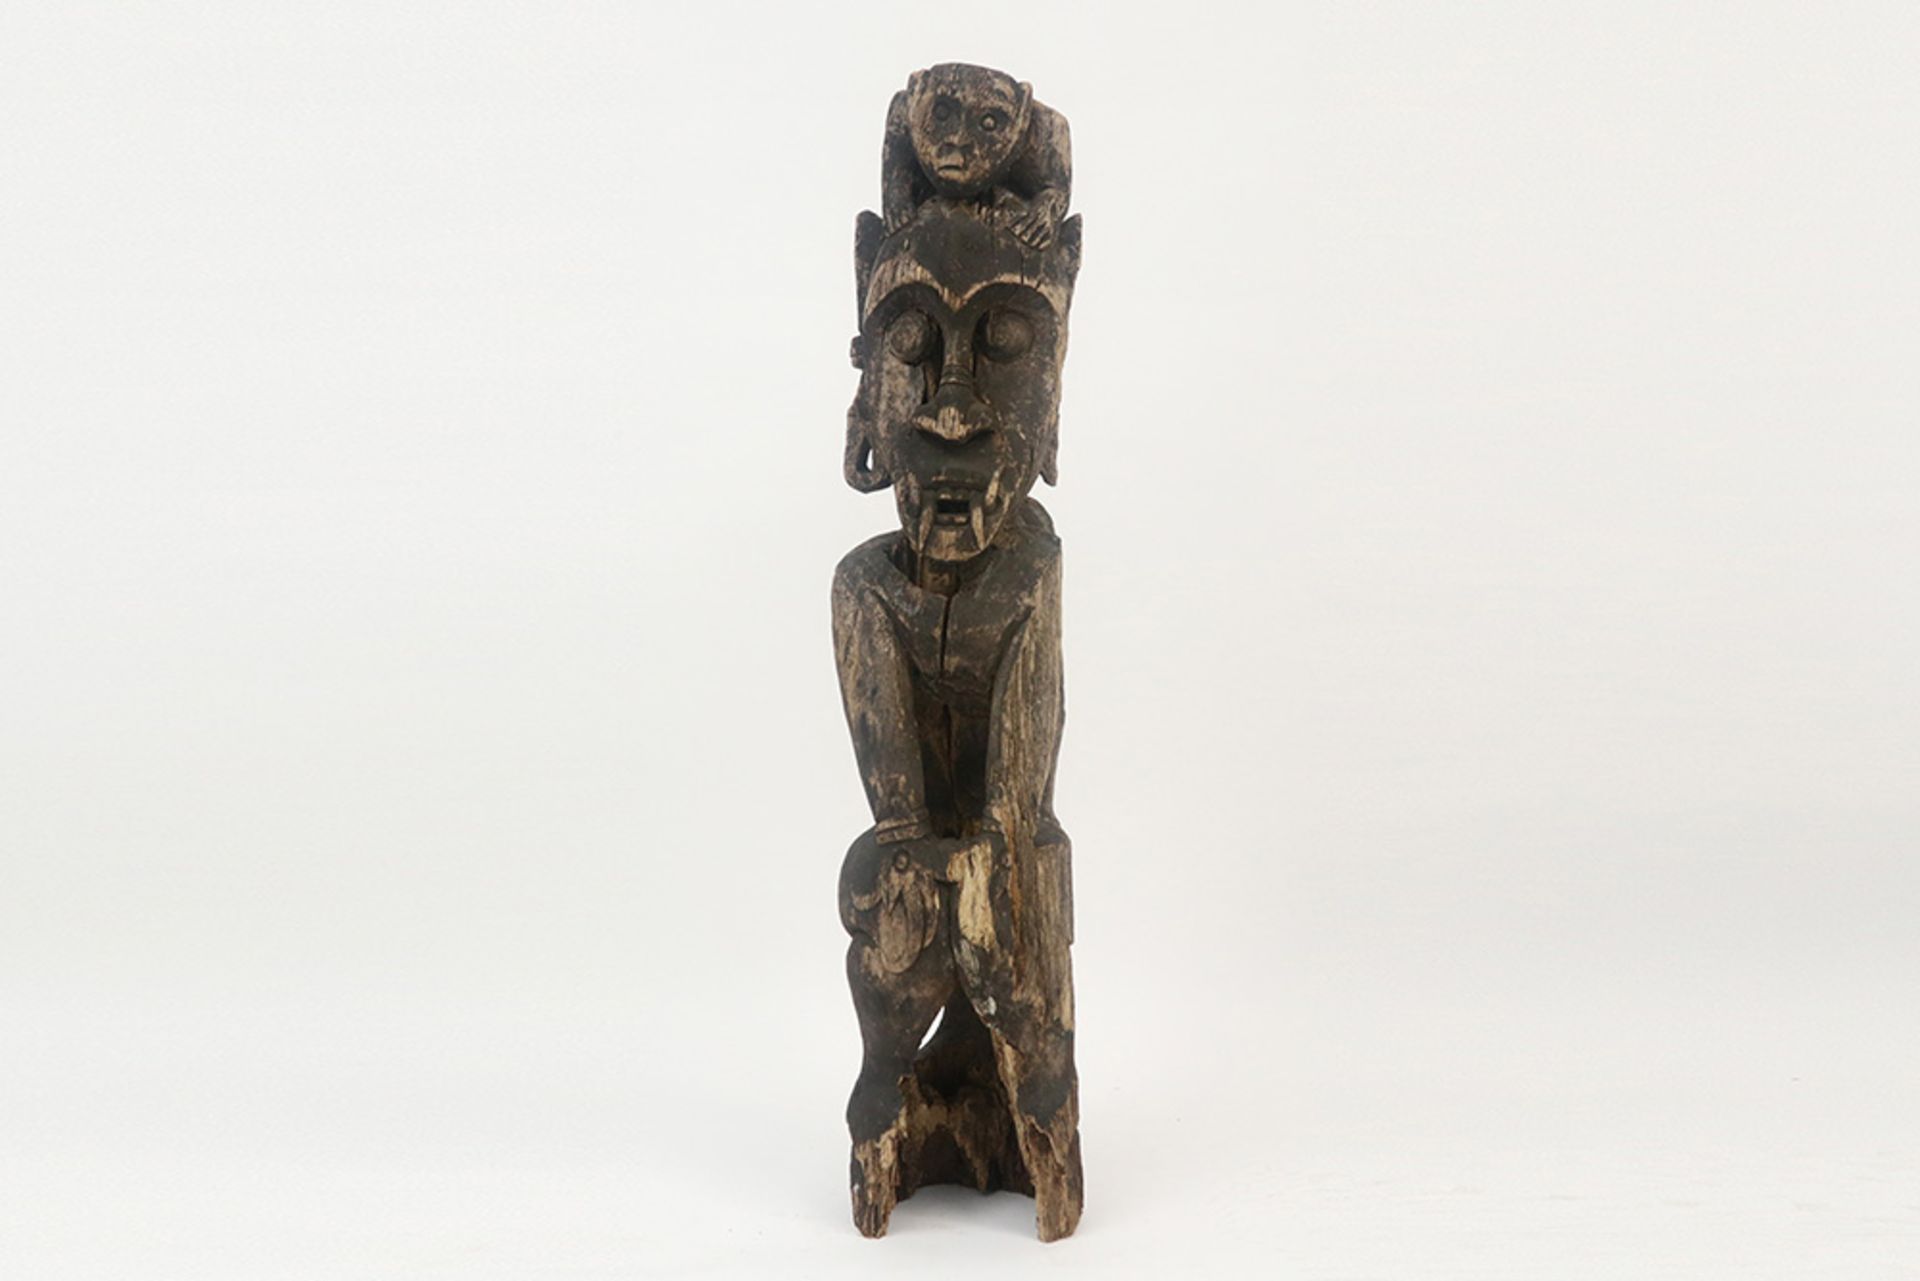 original Bahau Dayak sculpture in wood with the represenstation of a mythical figure with an